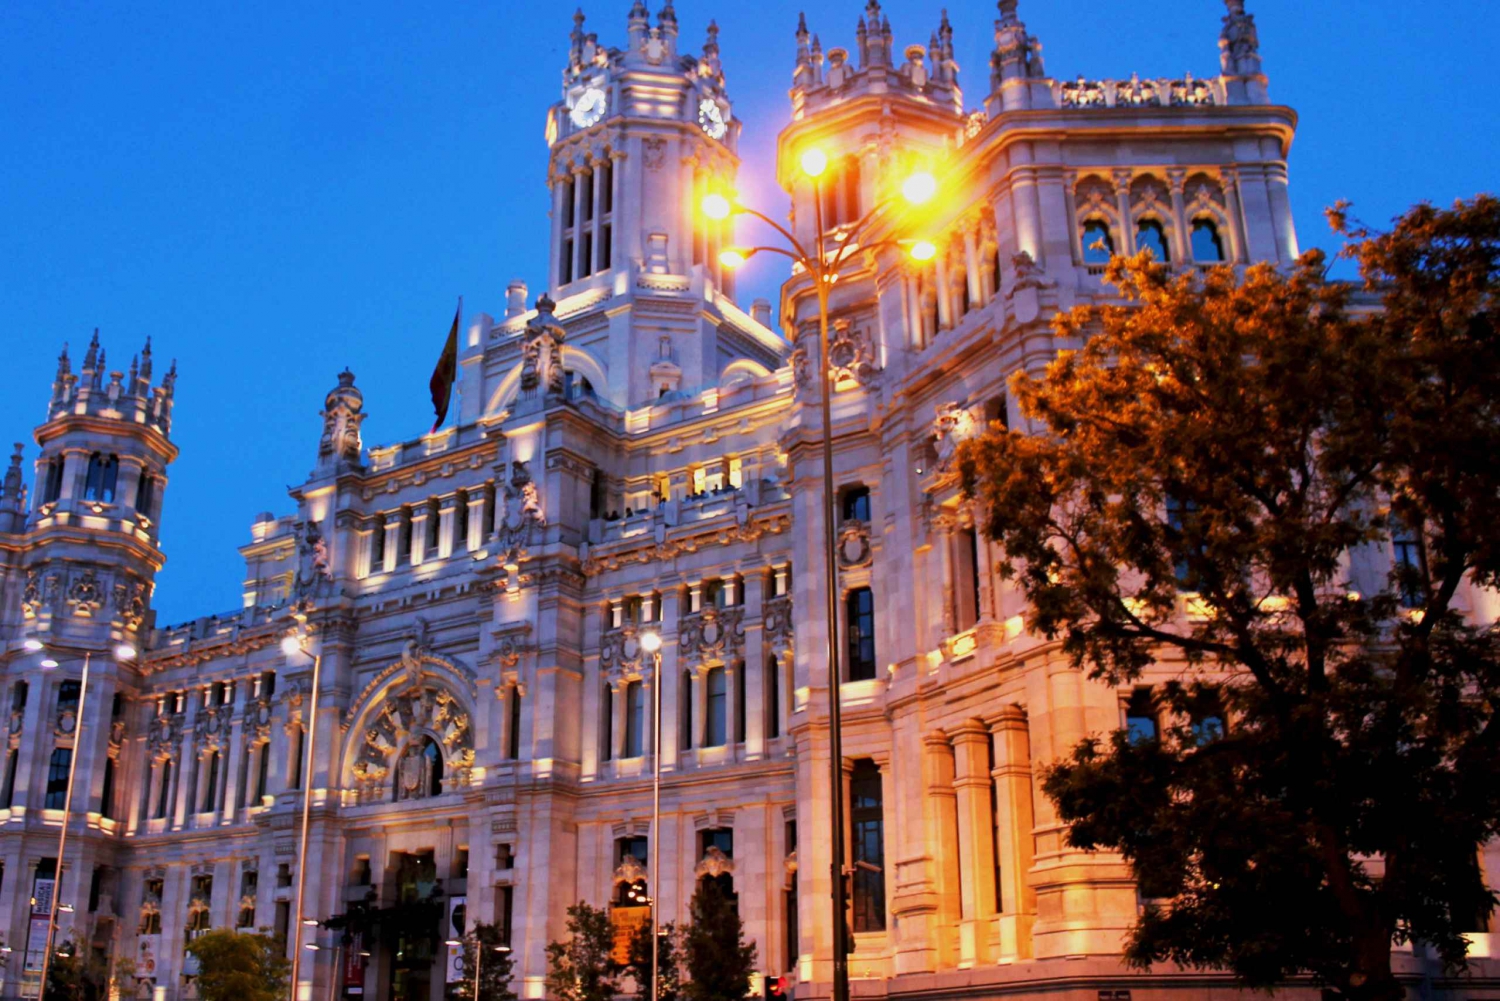 Madrid: First Discovery Walk and Reading Walking Tour